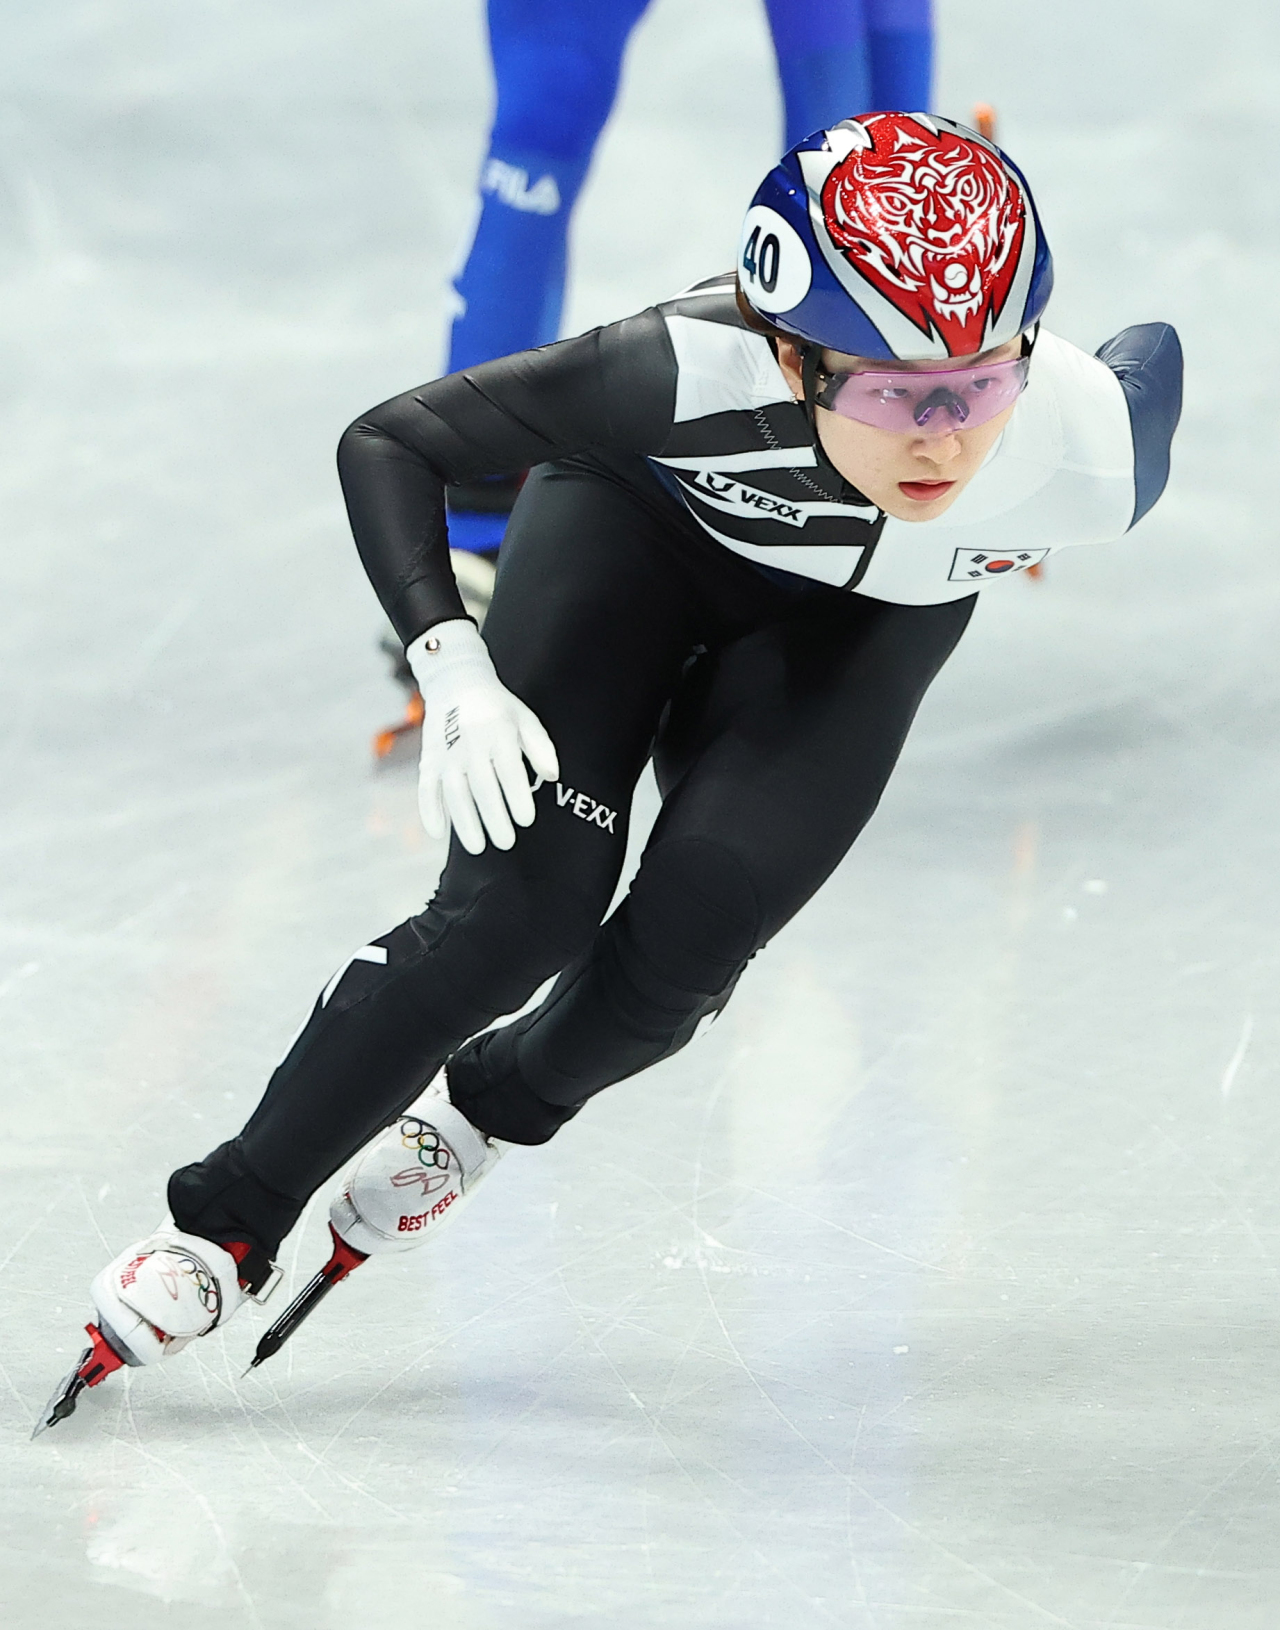 Choi Min-jeong of South Korea competes in the heats for the women's 500m in short track speed skating at the Beijing Winter Olympics at Capital Indoor Stadium in Beijing on Saturday. (Yonhap)